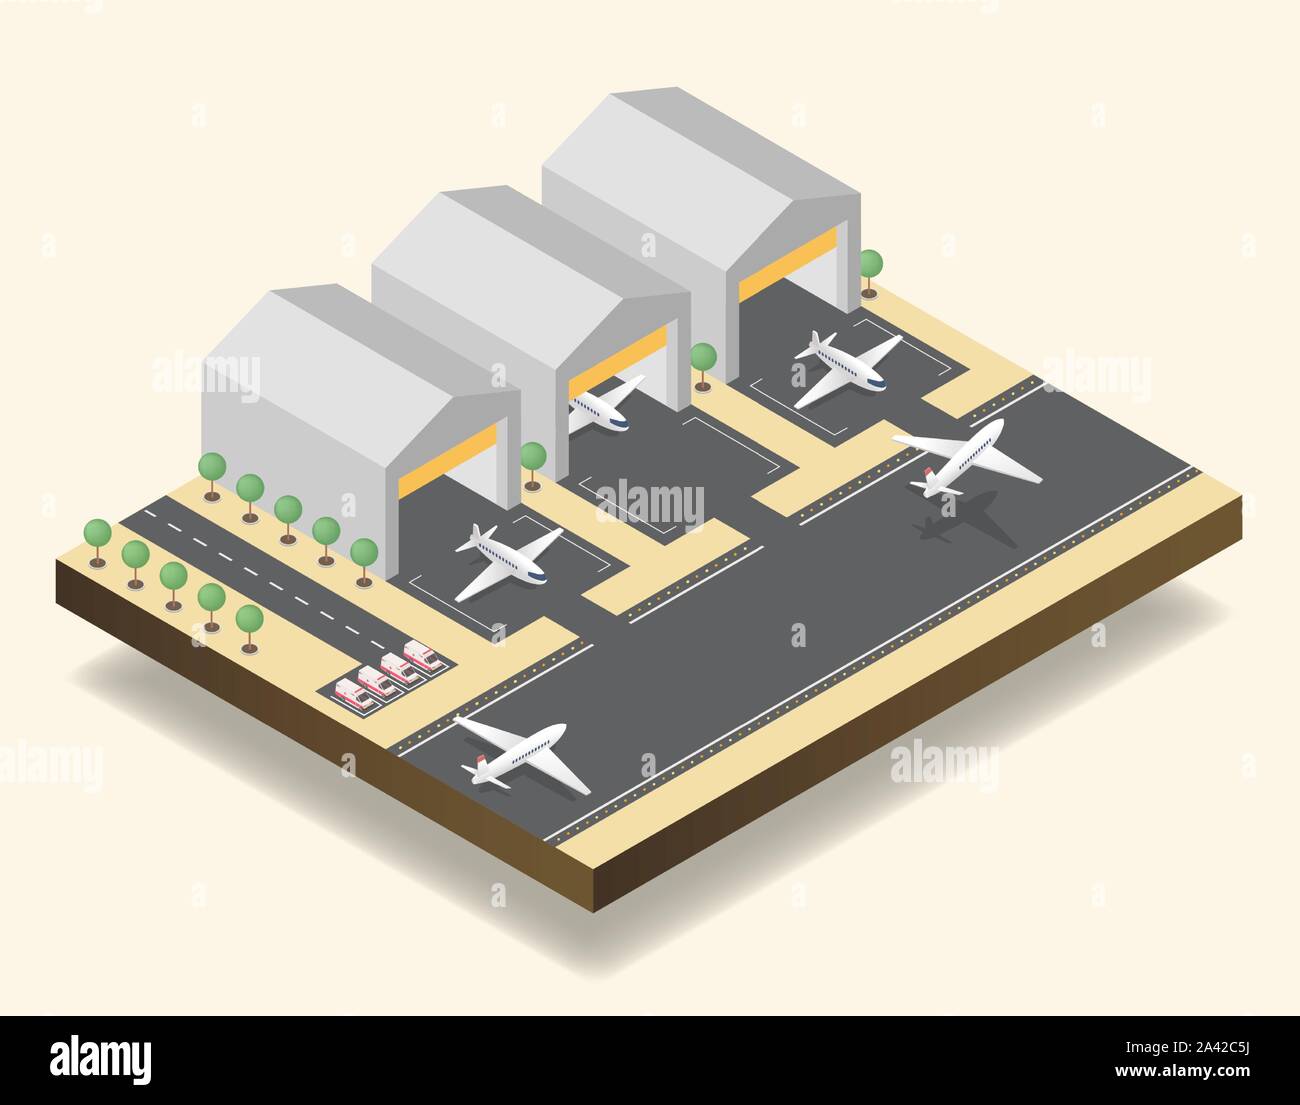 Airport runway, airfield isometric vector illustration. Modern air transportation business, aviation industry, commercial airline 3D design element. Cargo planes taking off, hangars and ambulance cars Stock Vector